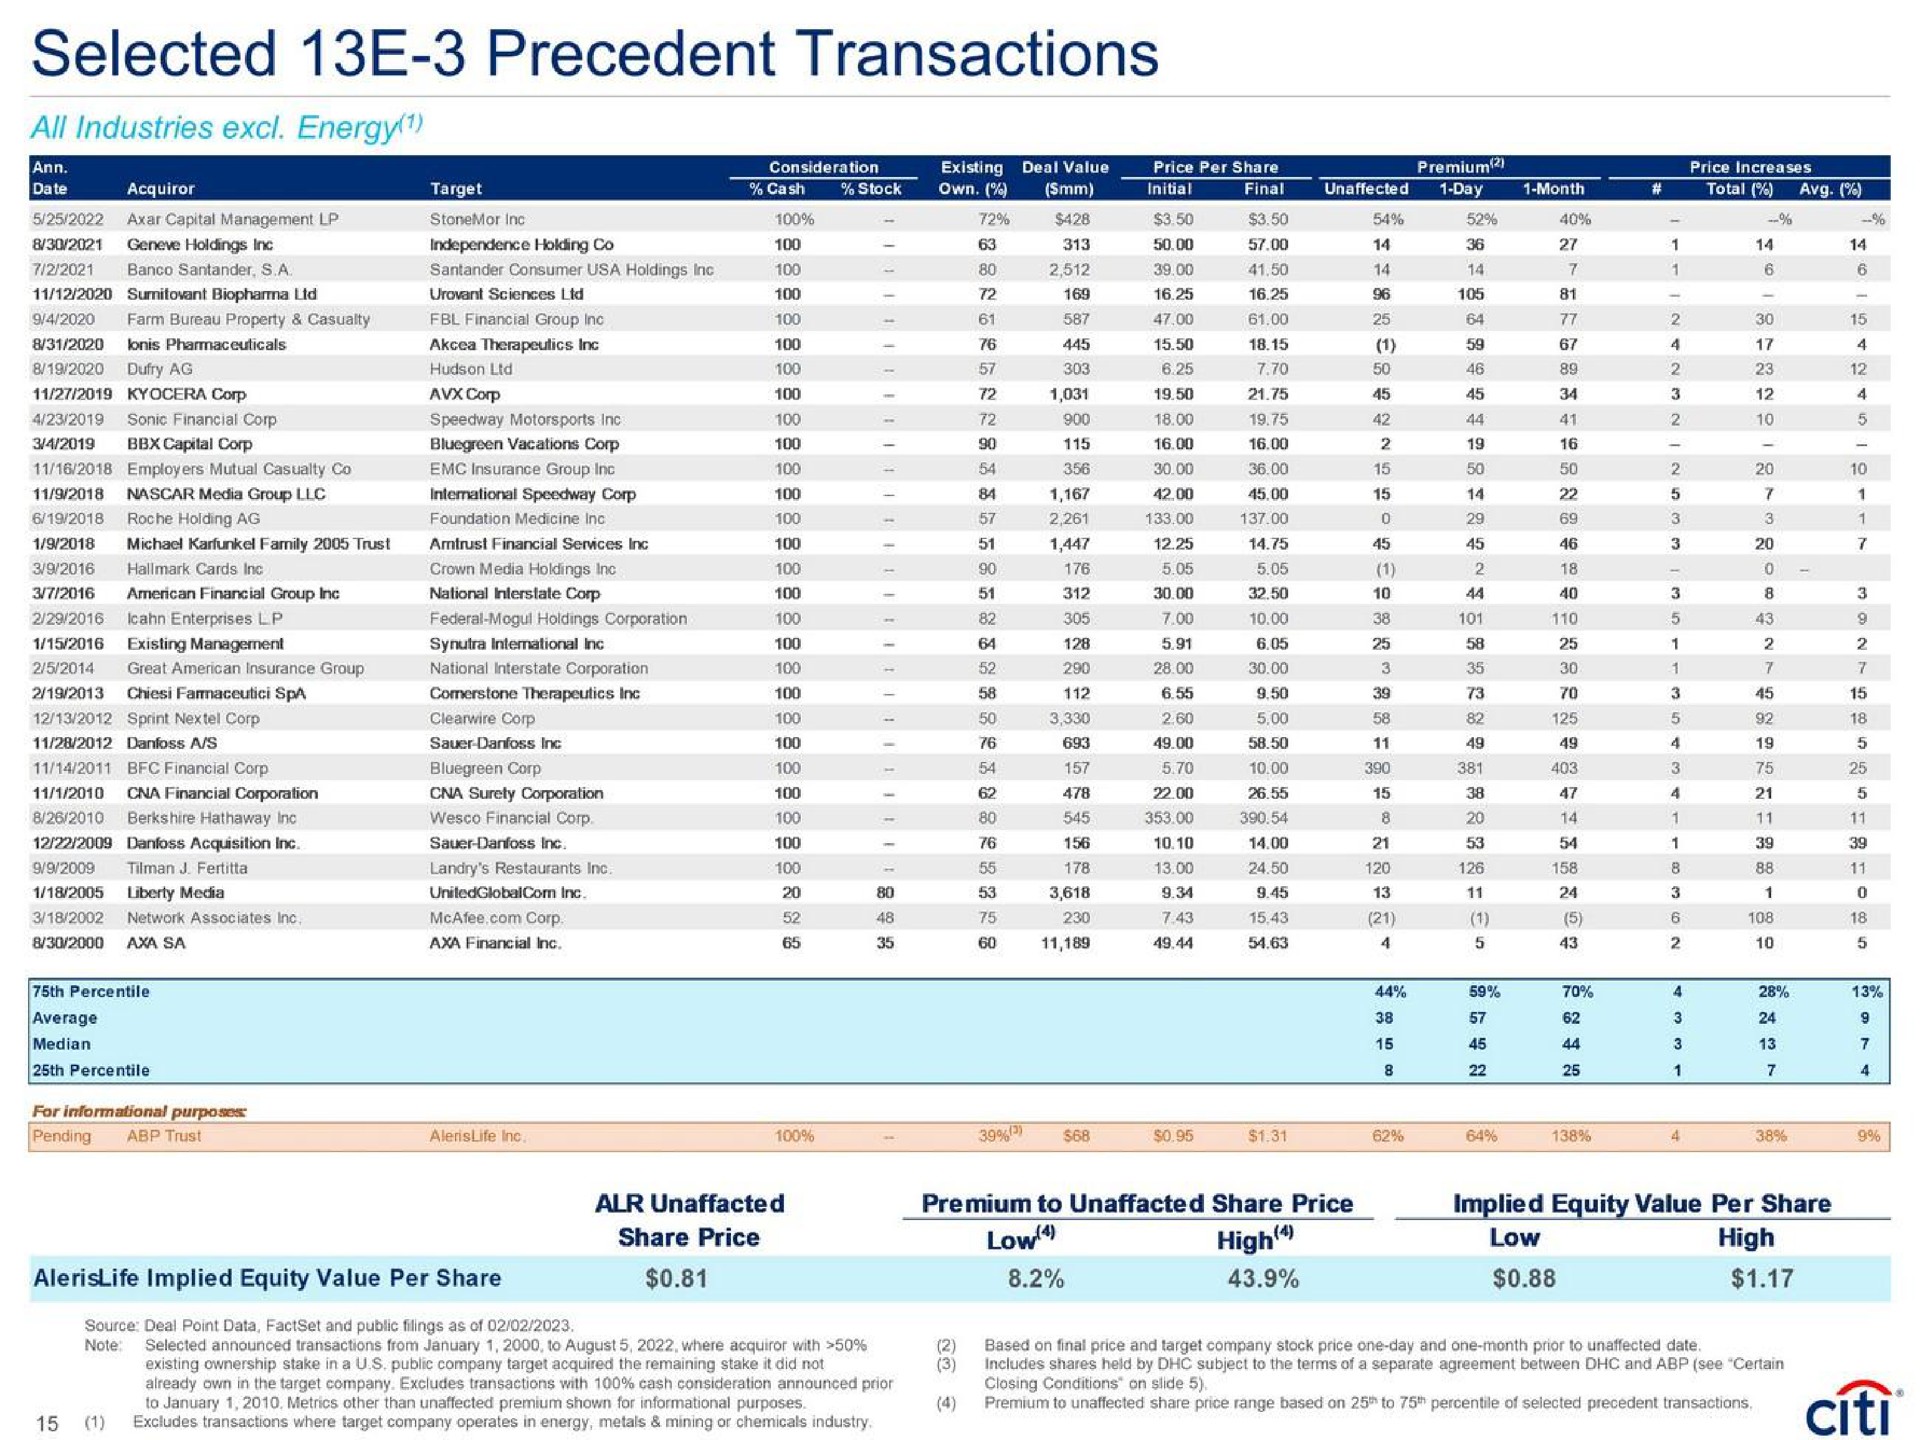 selected precedent transactions share price low high low high | Citi